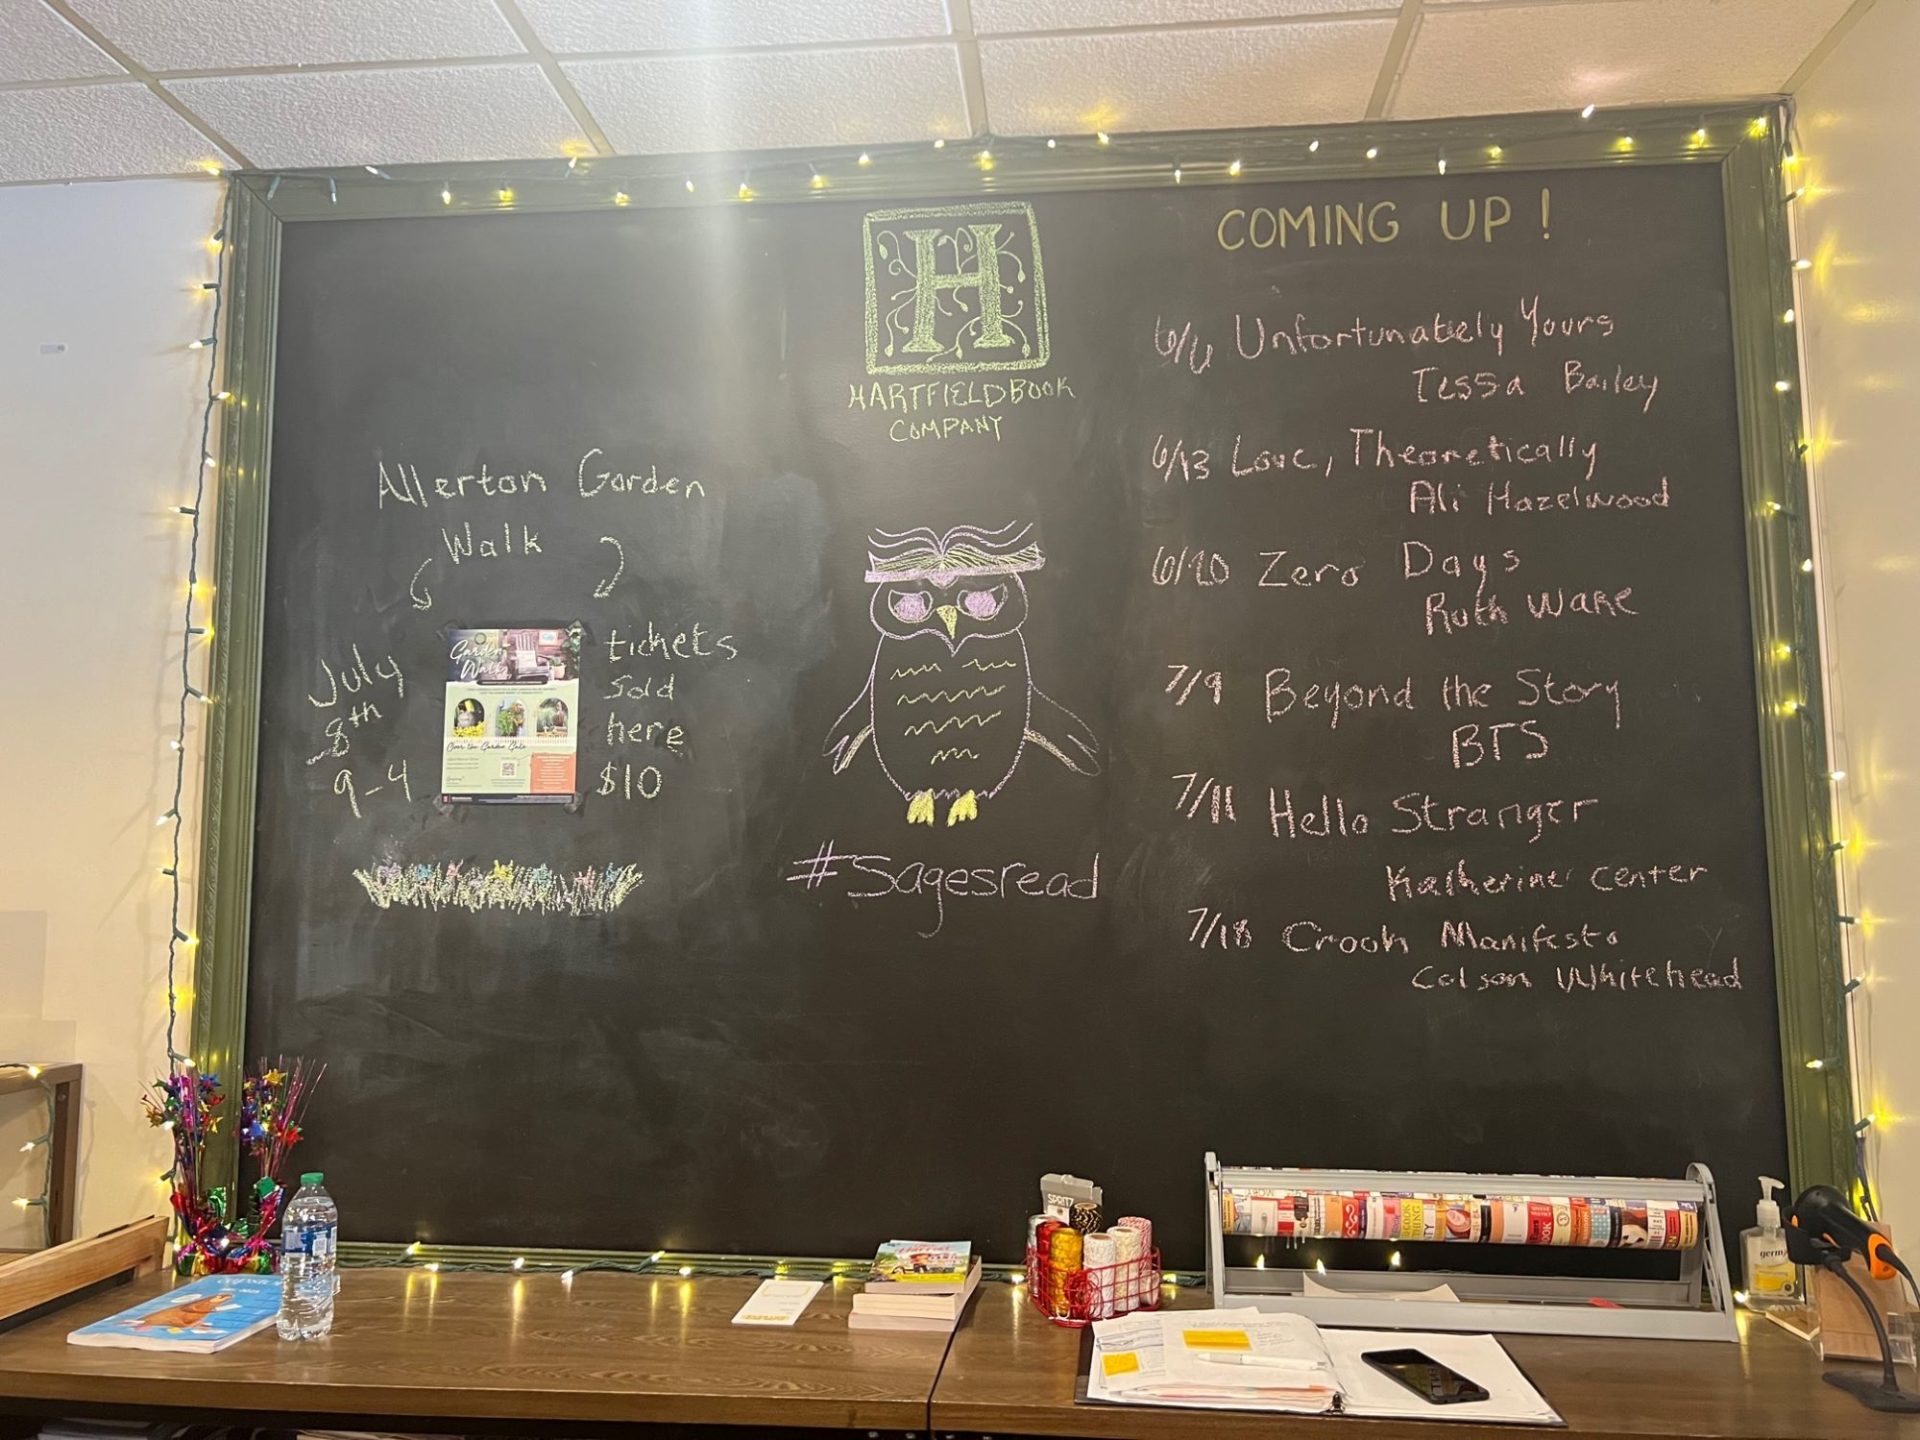 A large chalkboard hangs on a wall, and is lined with yellow string lights. There are several dates and book names written in white chalk.